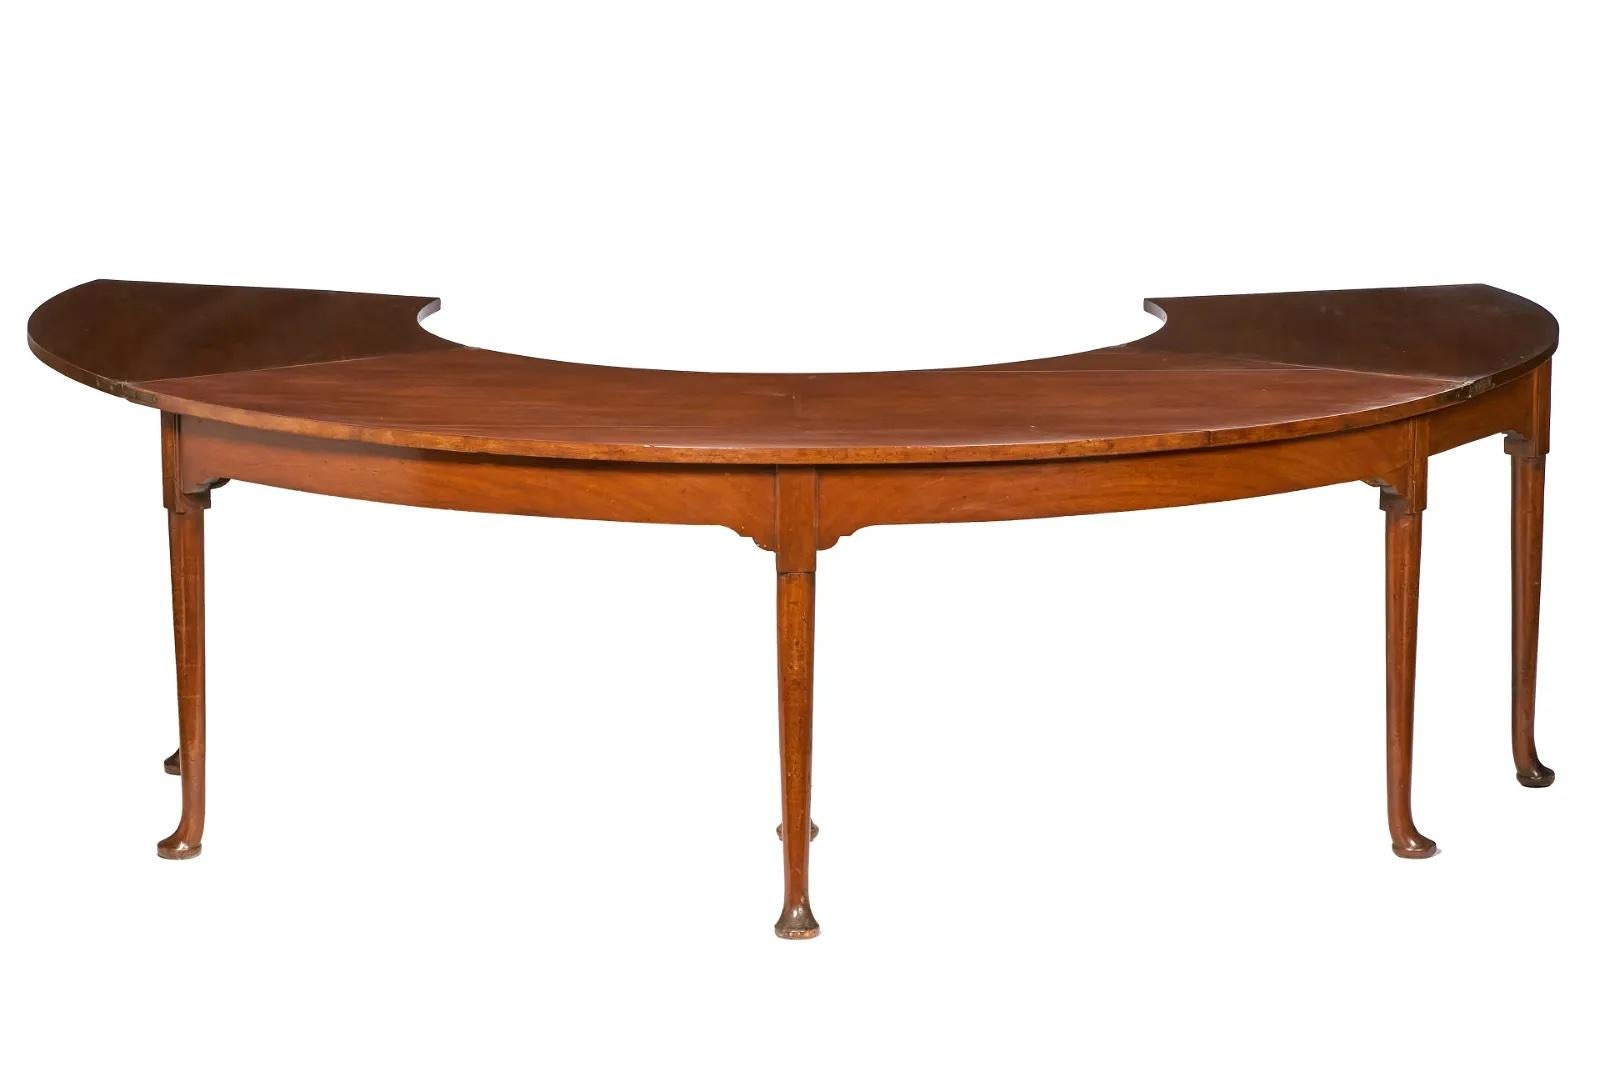 Hand-Carved Antique Period English Georgian Mahogany Horseshoe Hunt / Wine Table Circa 1790 For Sale